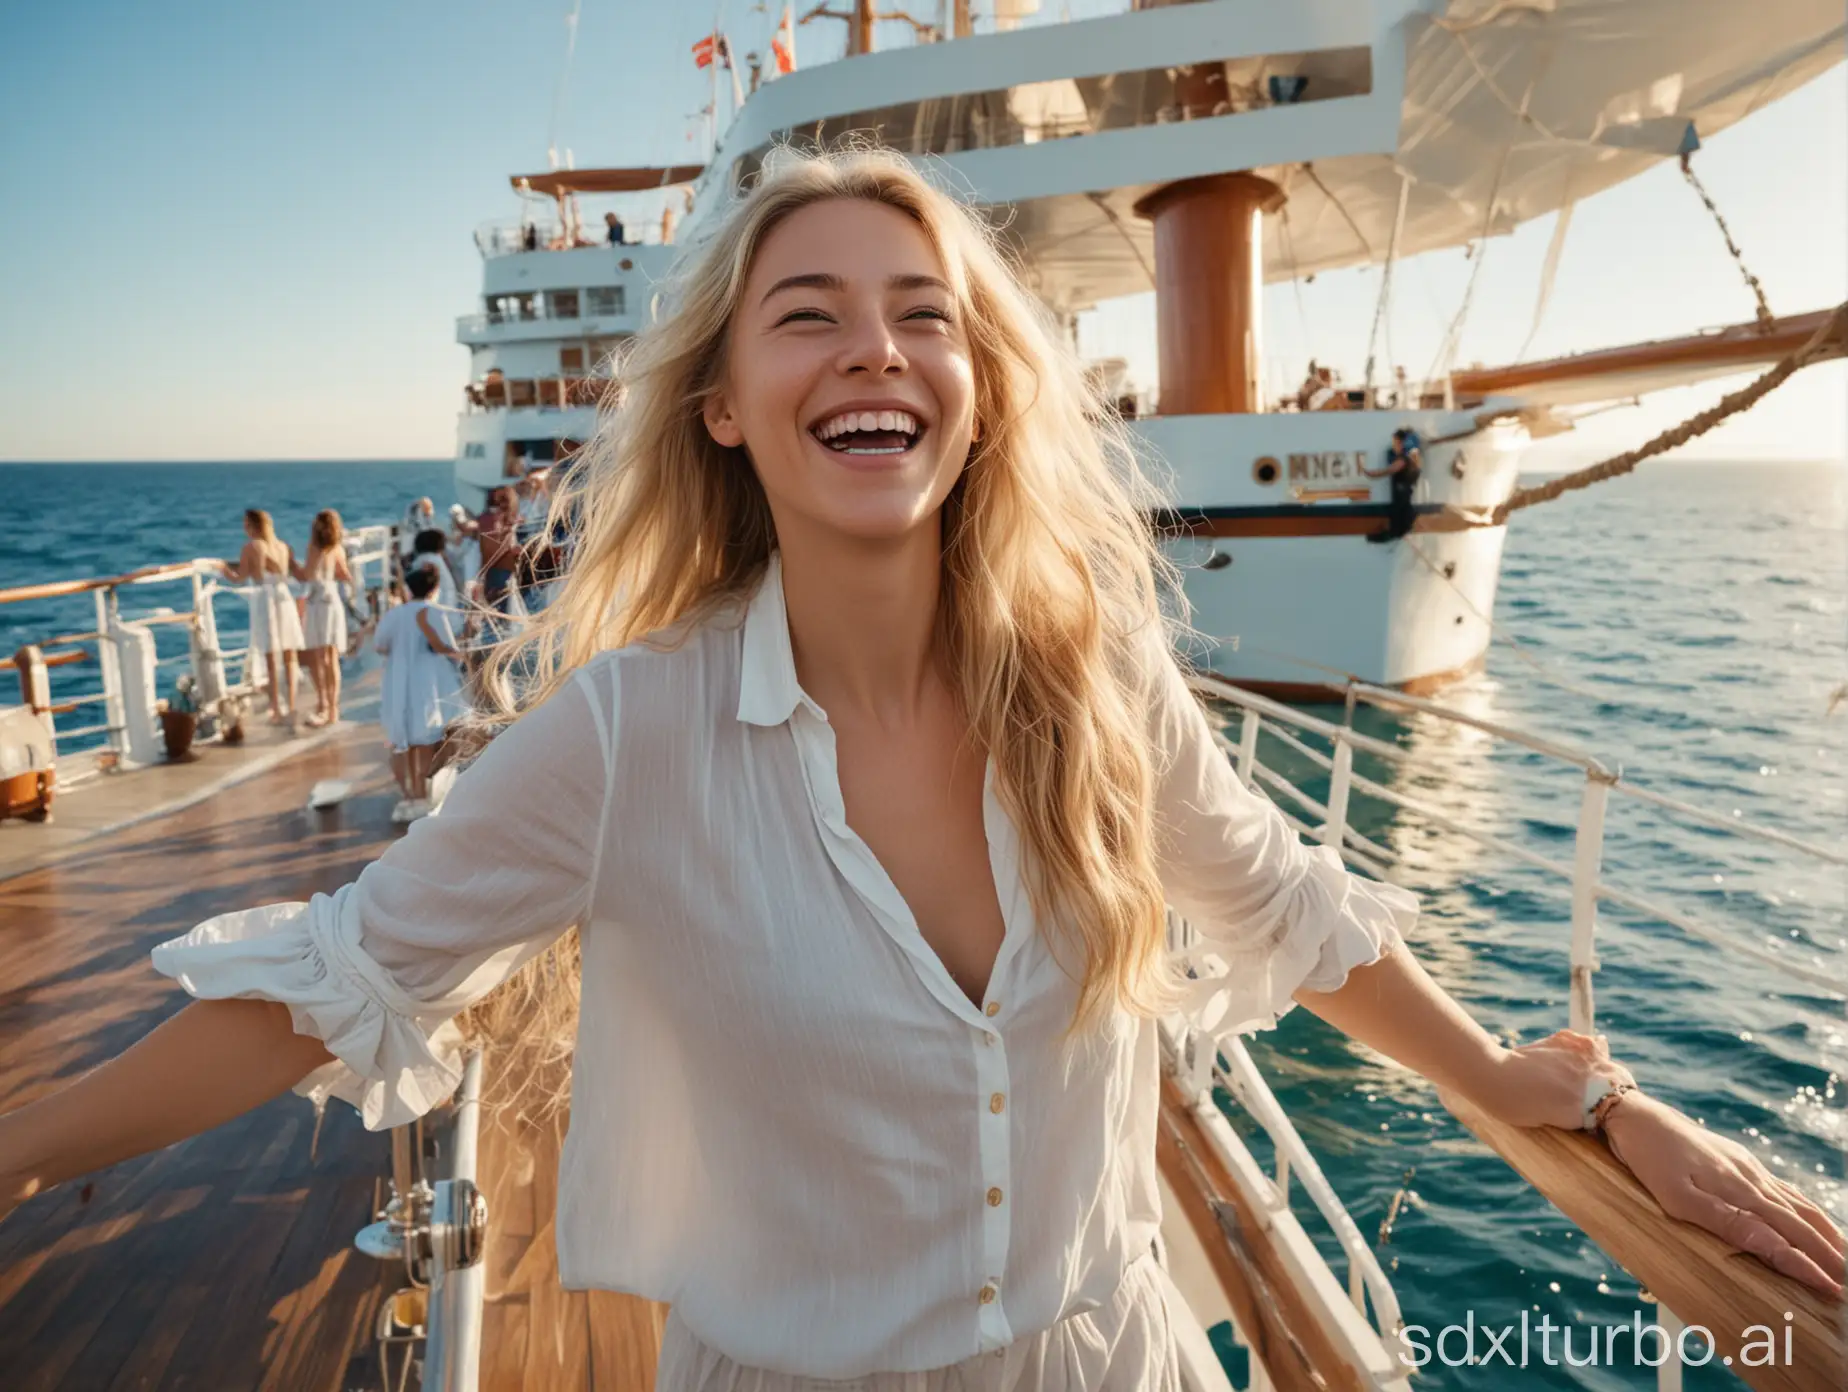 a magnificent ship on the sea. A woman with long blonde hair is standing on deck. She is laughing. It is a sunny day. There is a pool on the ship.